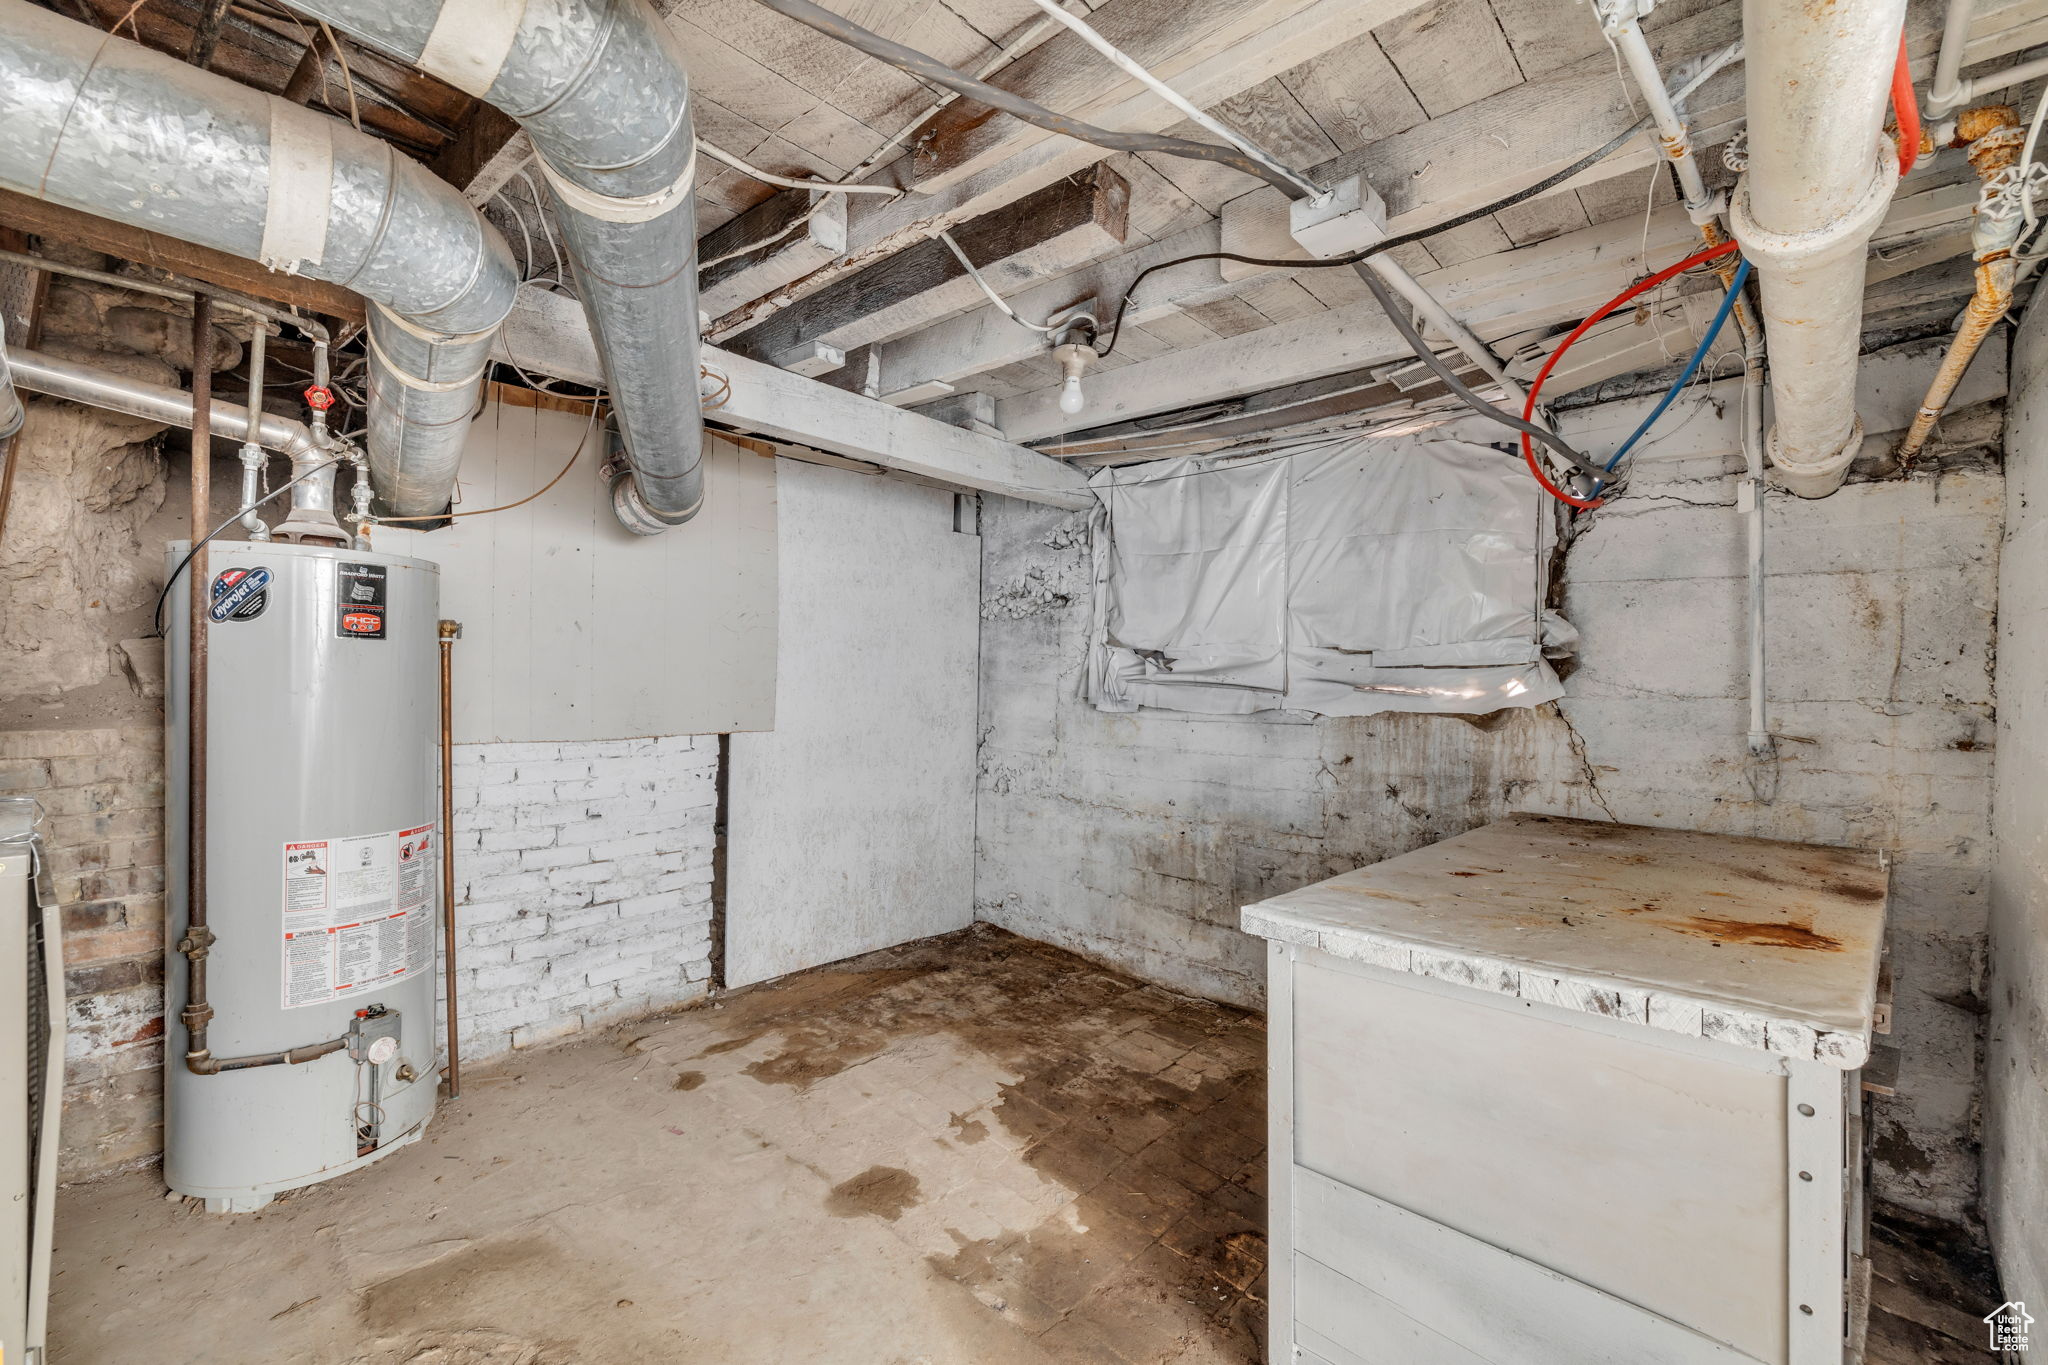 Basement with water heater